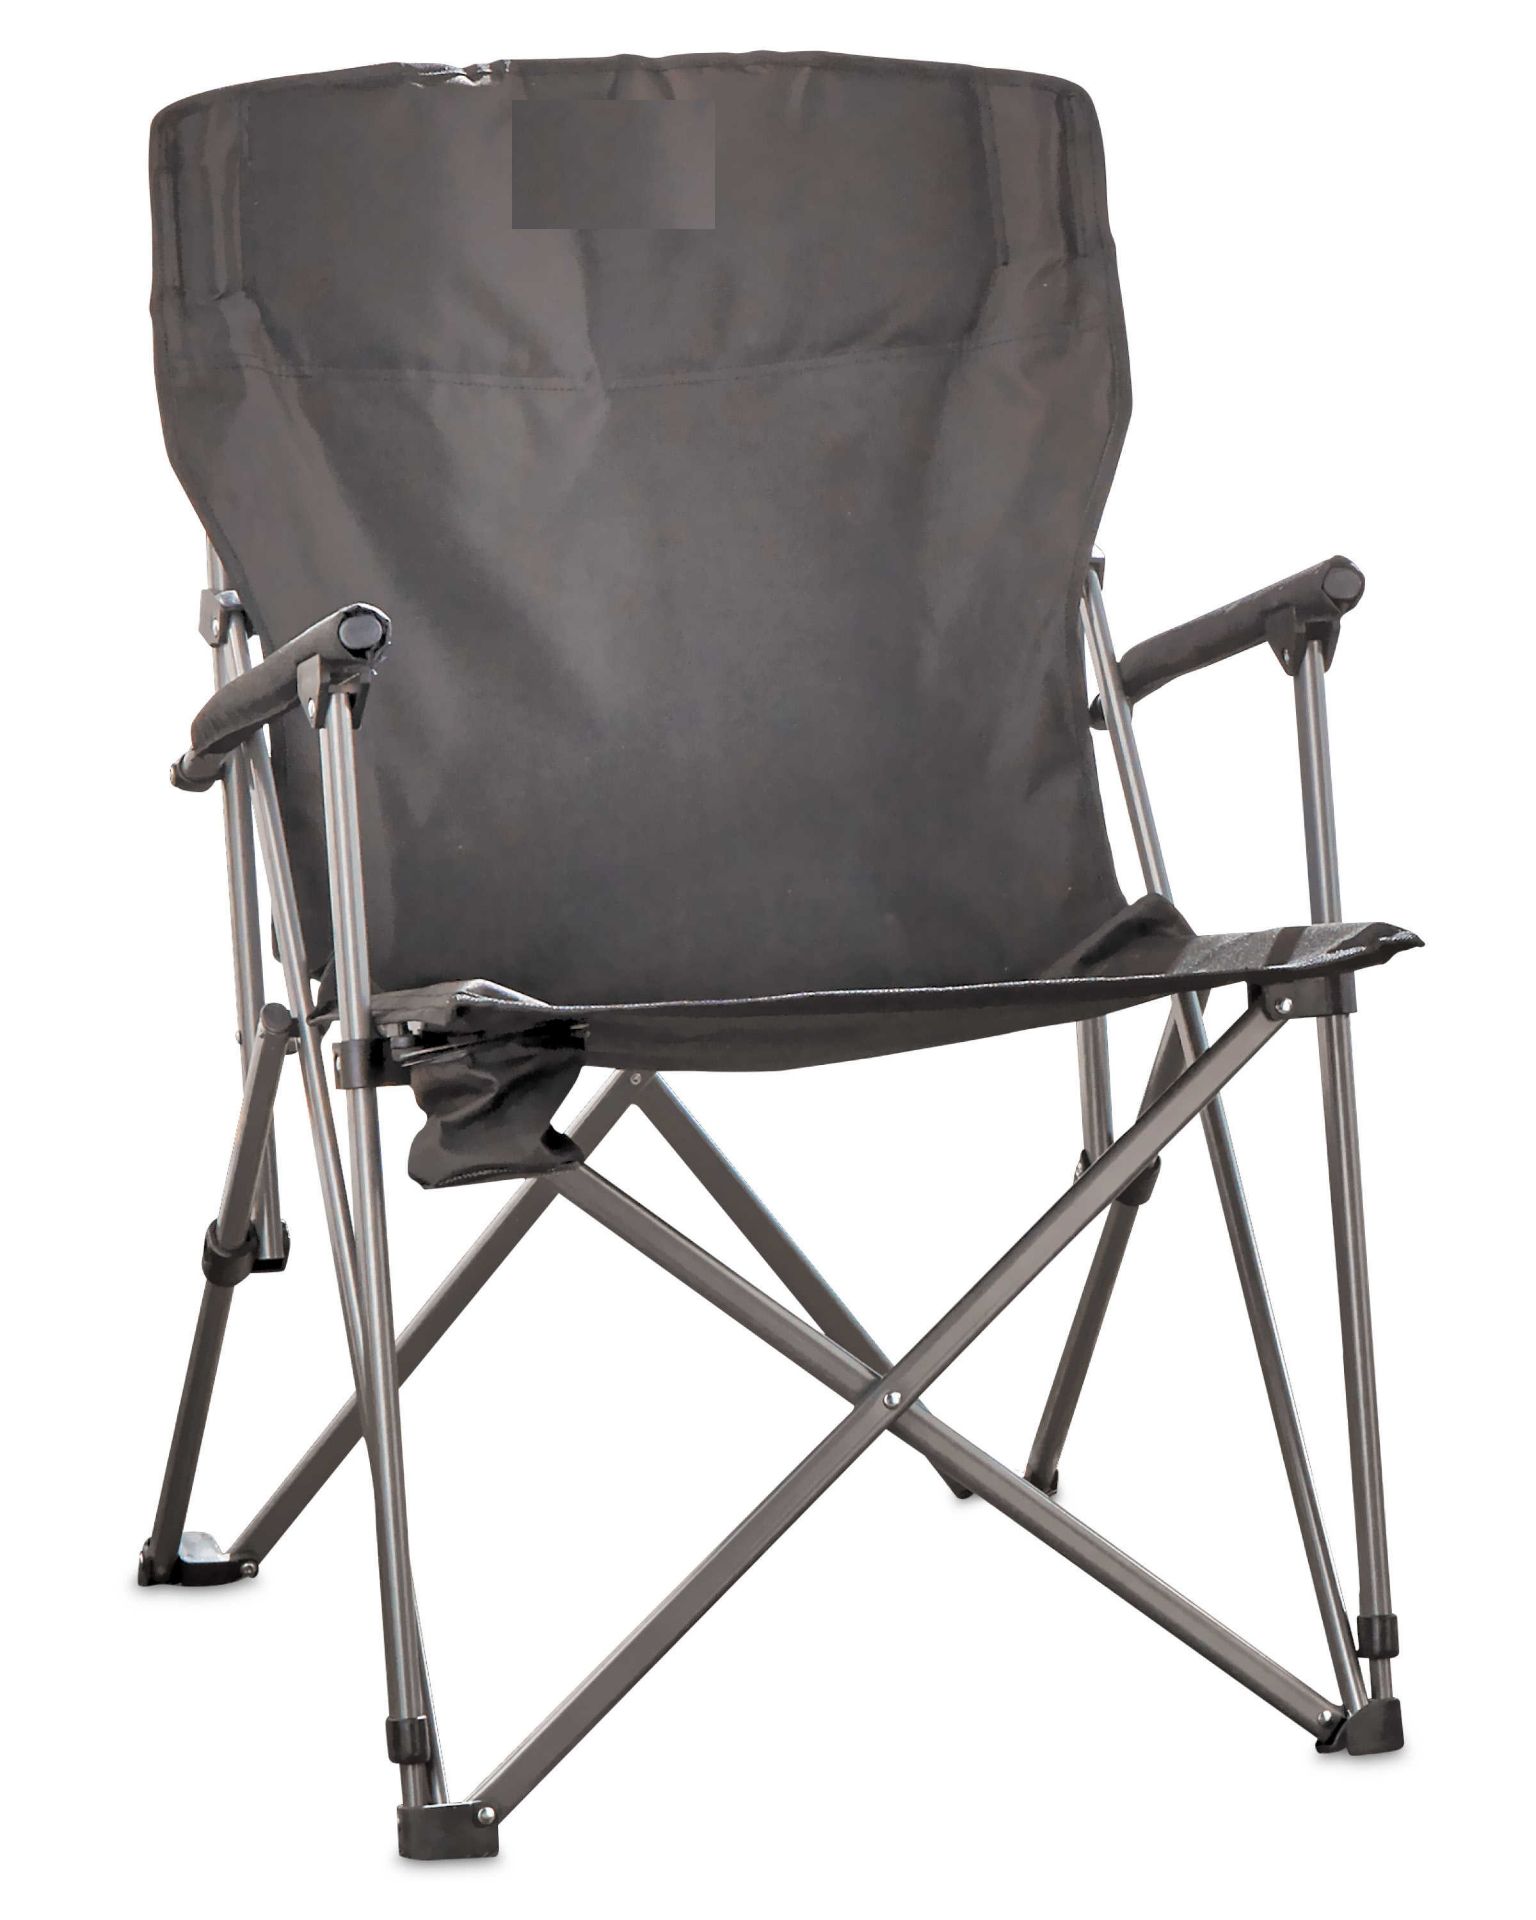 V *TRADE QTY* Brand New Tourer/Expedition Chair In Silver/Black With Carry Case - Lightweight